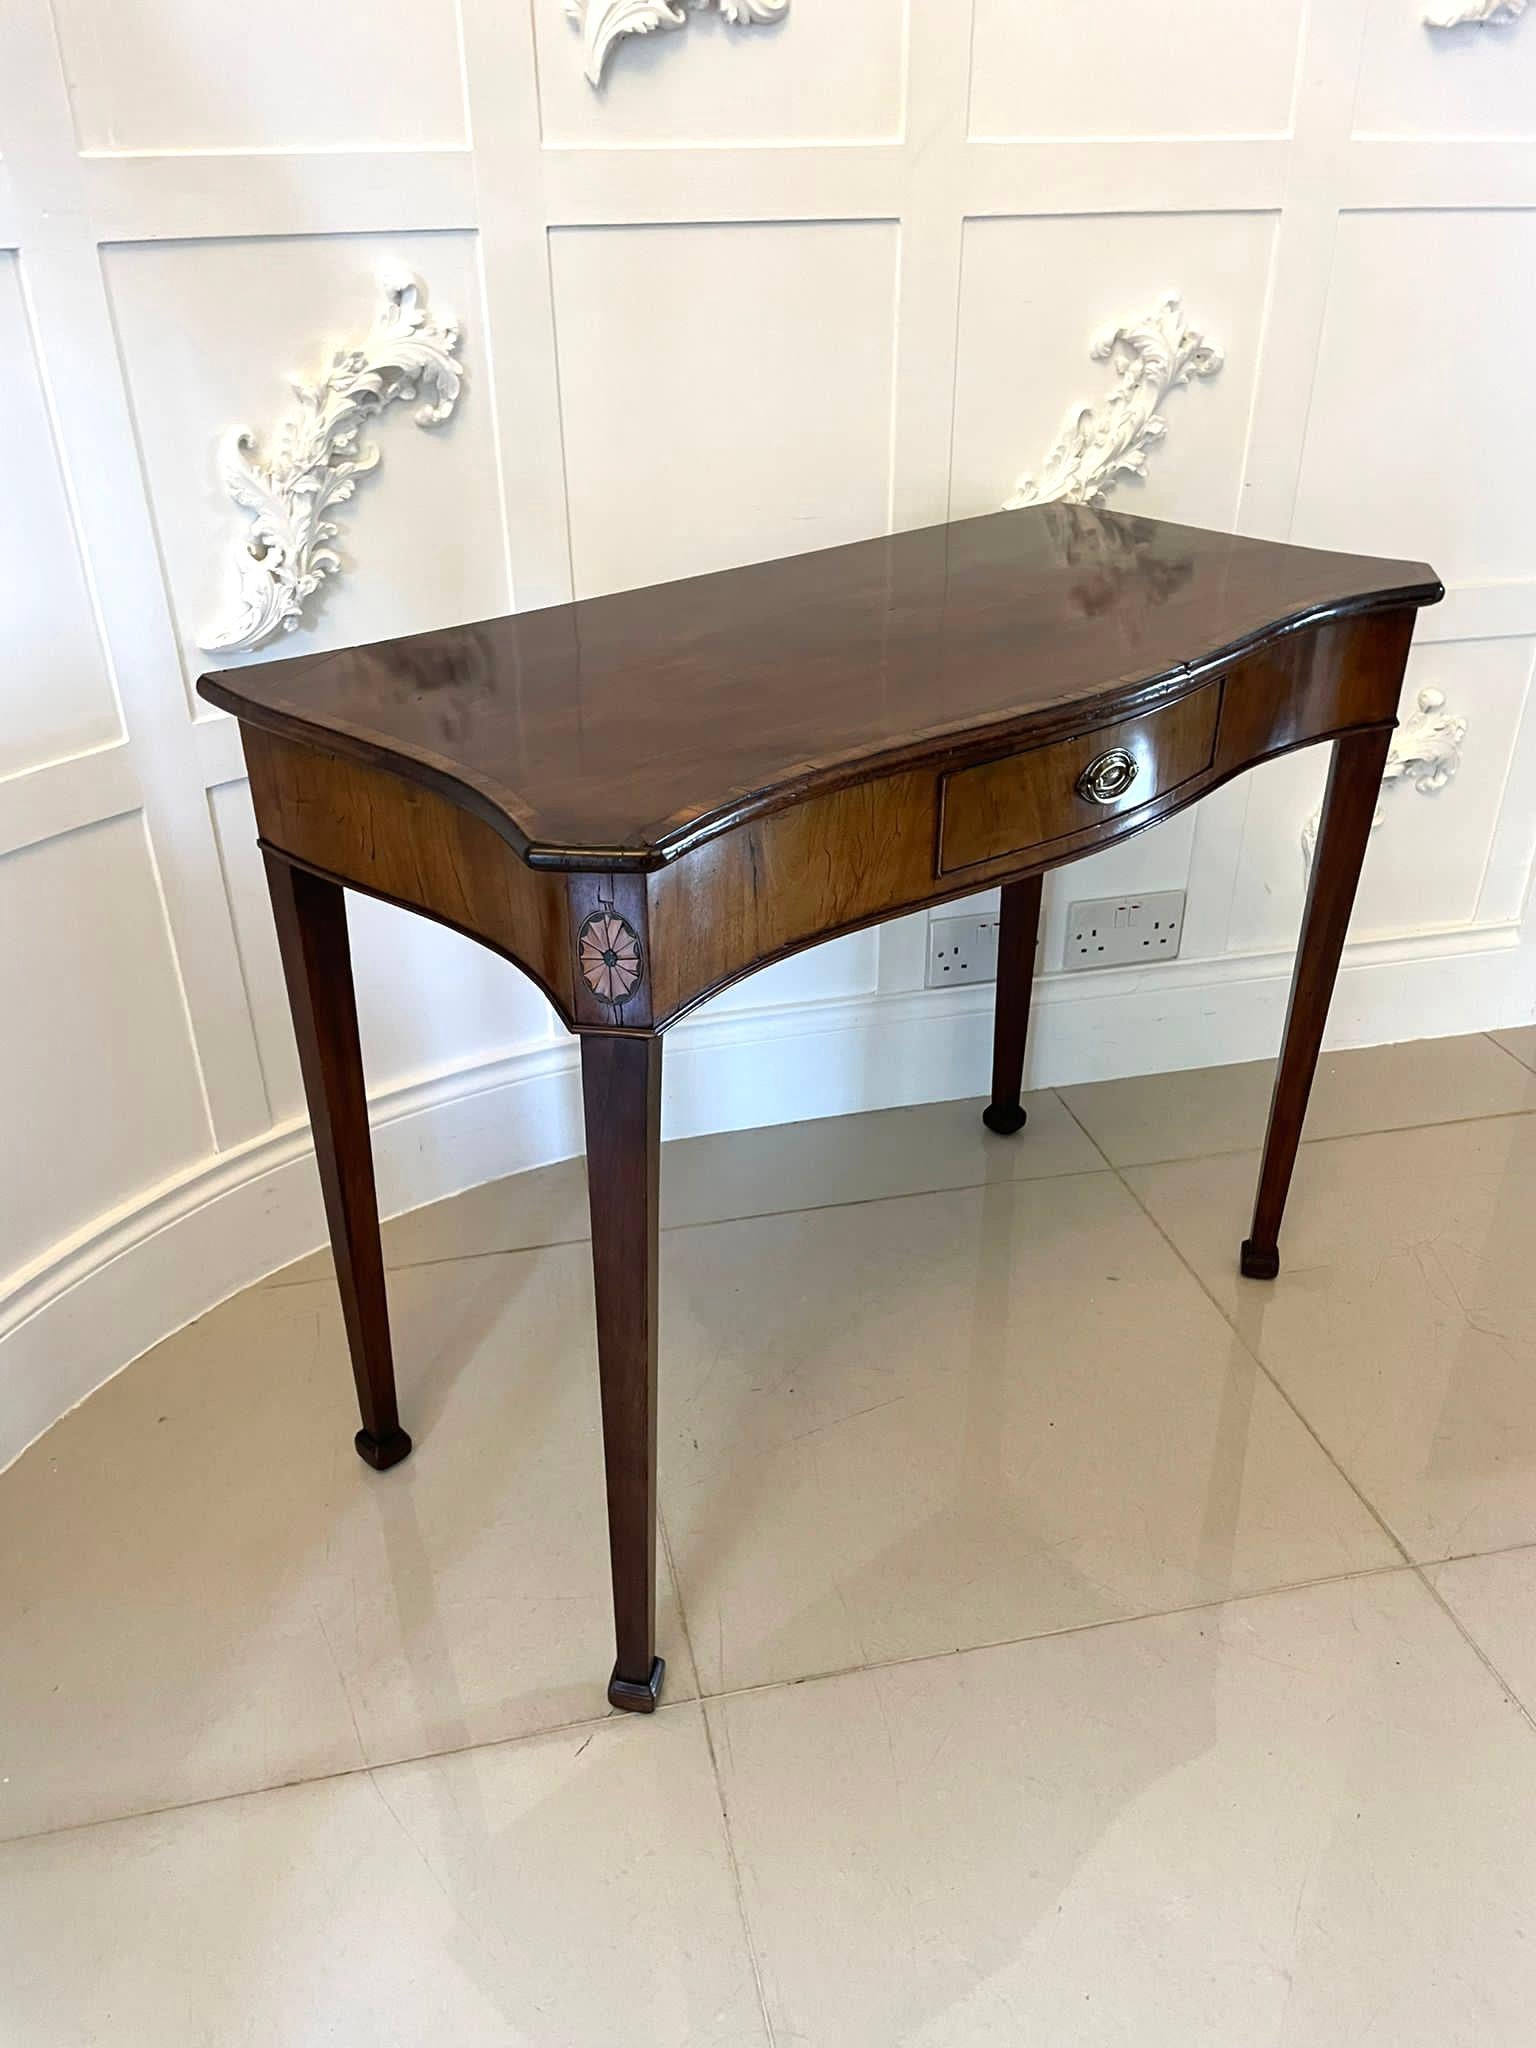 Antique 18th century George III quality mahogany Hepplewhite serpentine shaped side table having a quality mahogany serpentine shaped side table with a satinwood crossbanded edge, serpentine shaped shell inlaid frieze with a single drawer original